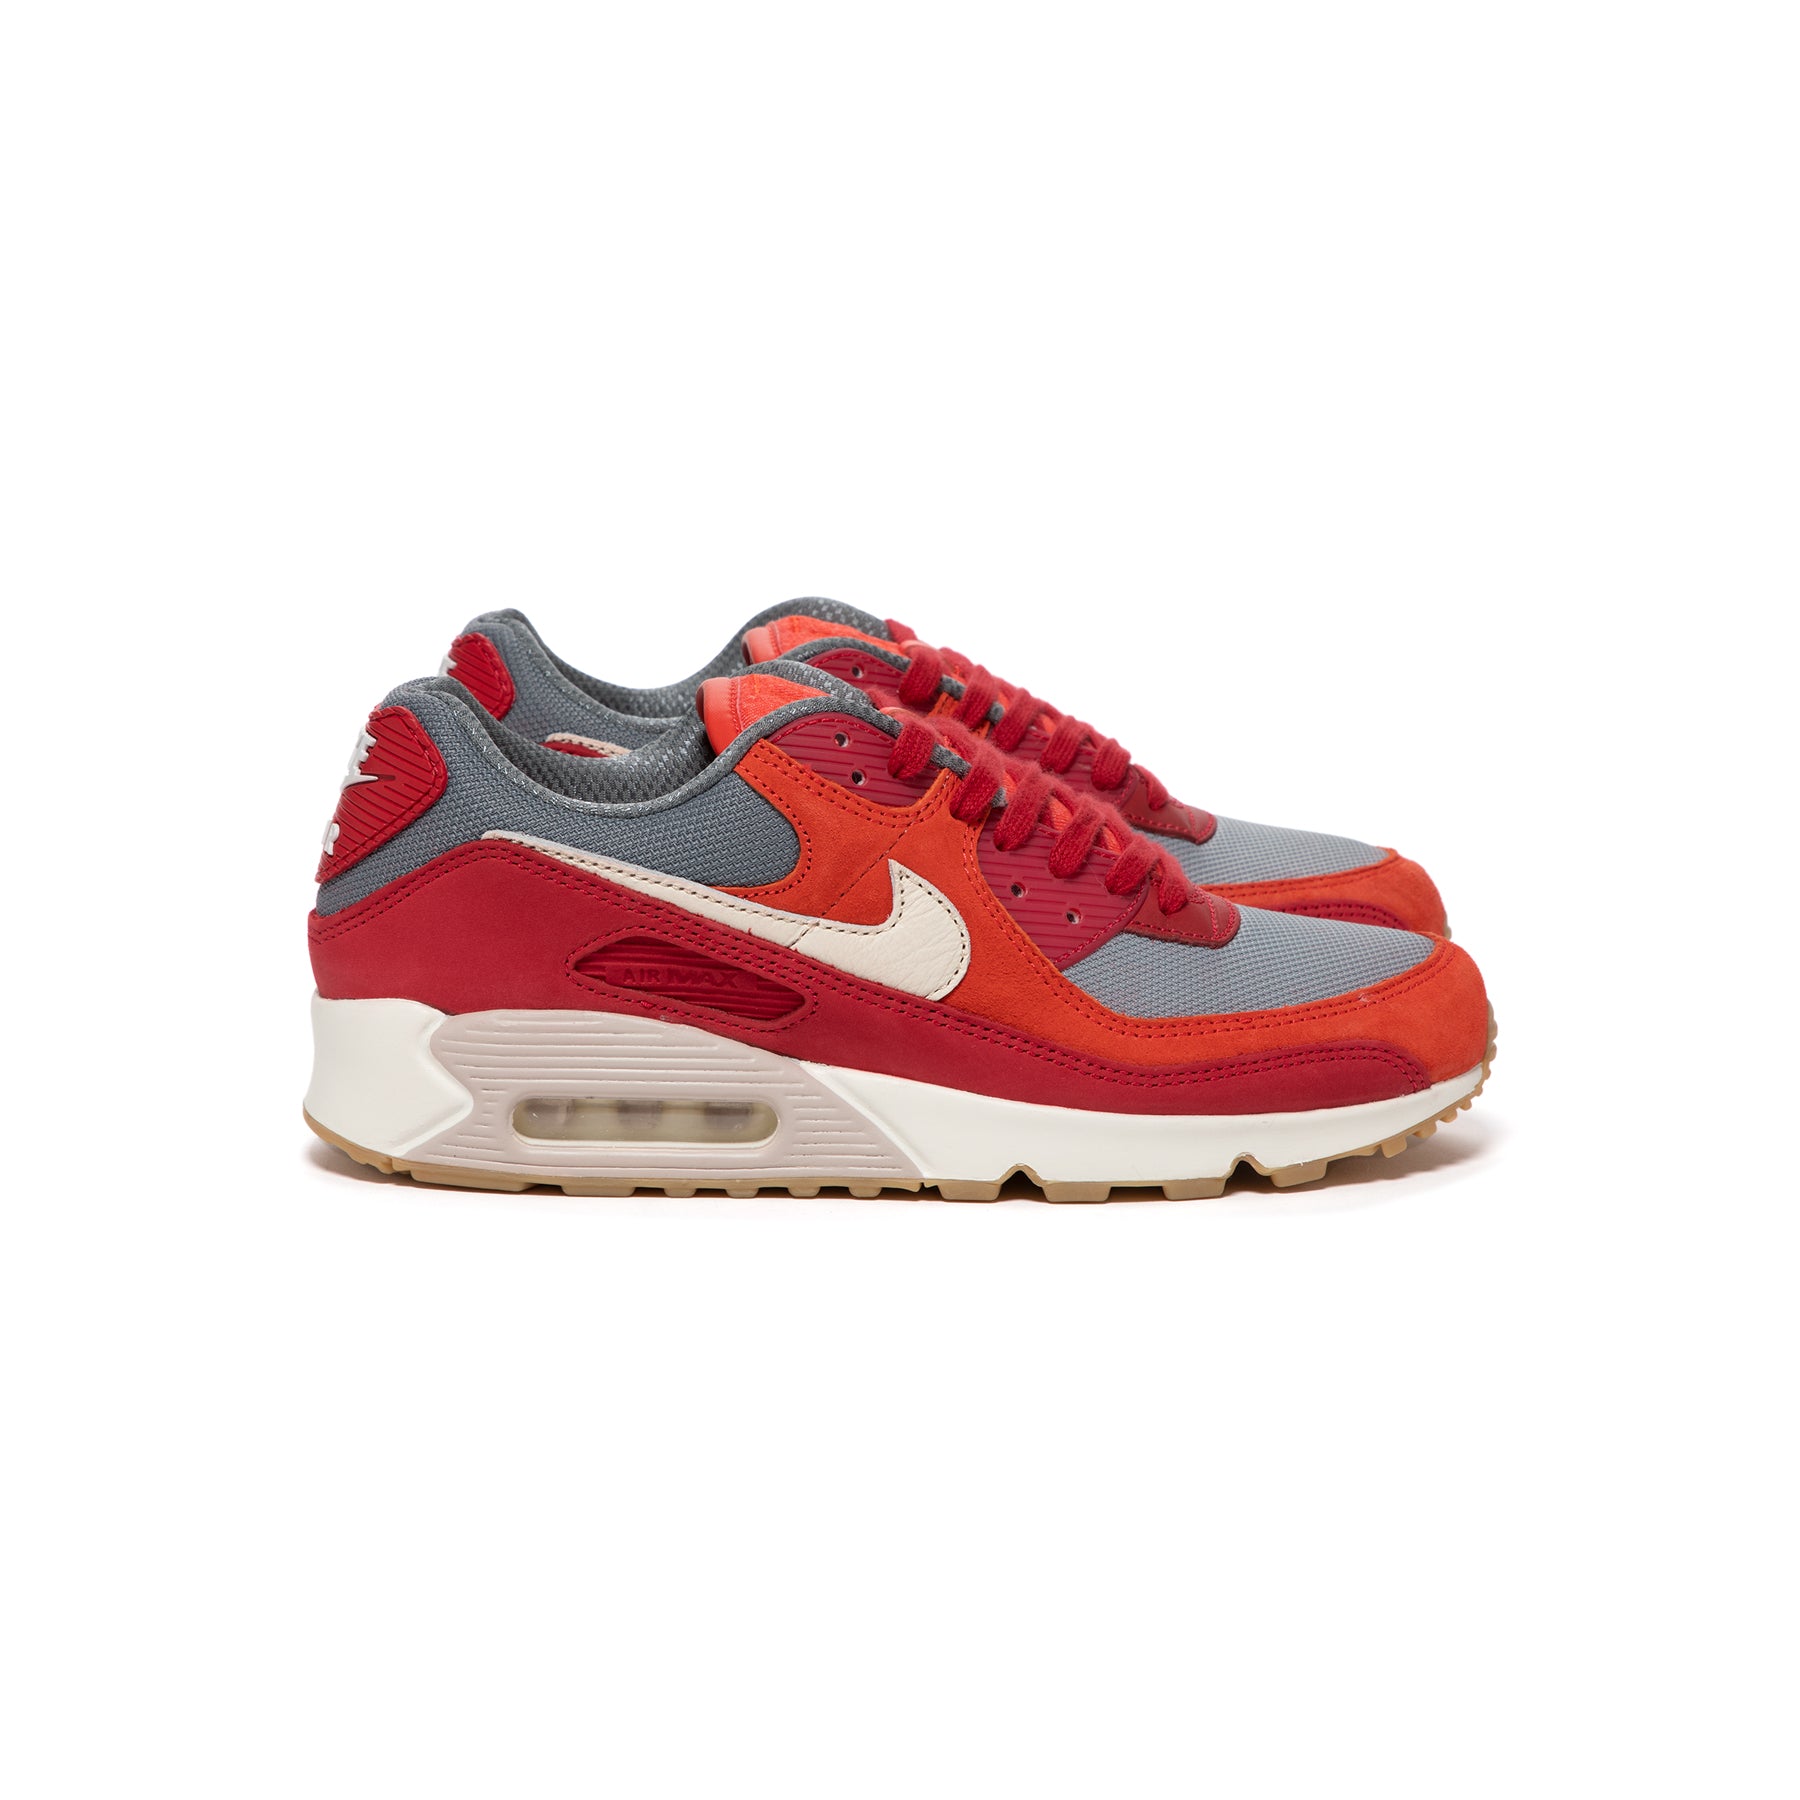 Nike baktill Air Max 90 Red Velvet725235-600 - 100 Planet of Hoops Release  Date - Nike baktill Air Force 1 07 Lux White GoldCasual Platform Shoes  DM7590 - Air Force 1 Low St